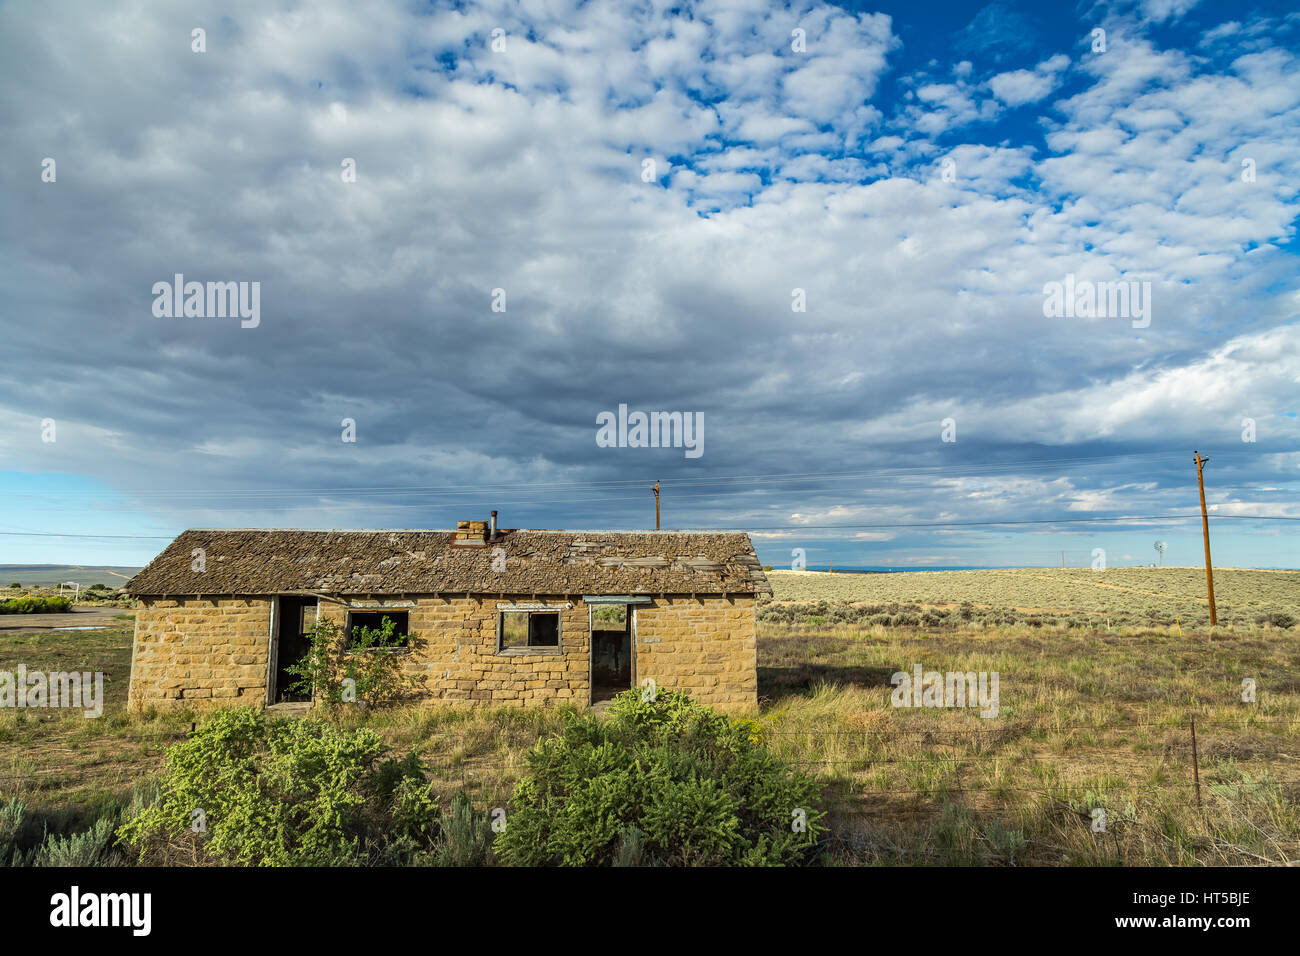 A stone building sits abandoned in the high desert of New Mexico Stock Photo